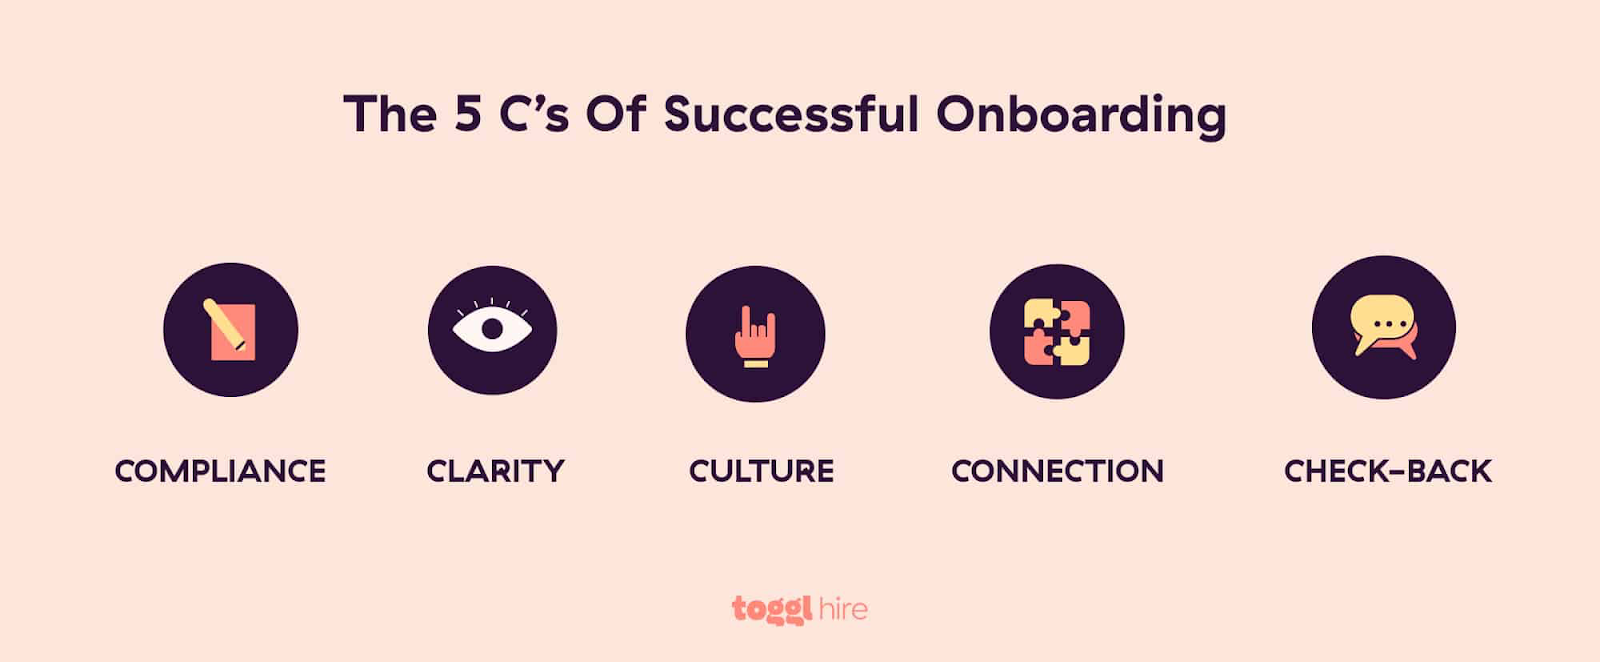 A screenshot that shows the 5 C's of onboarding which are, compliance, clarity, culture, connection, check-back. 